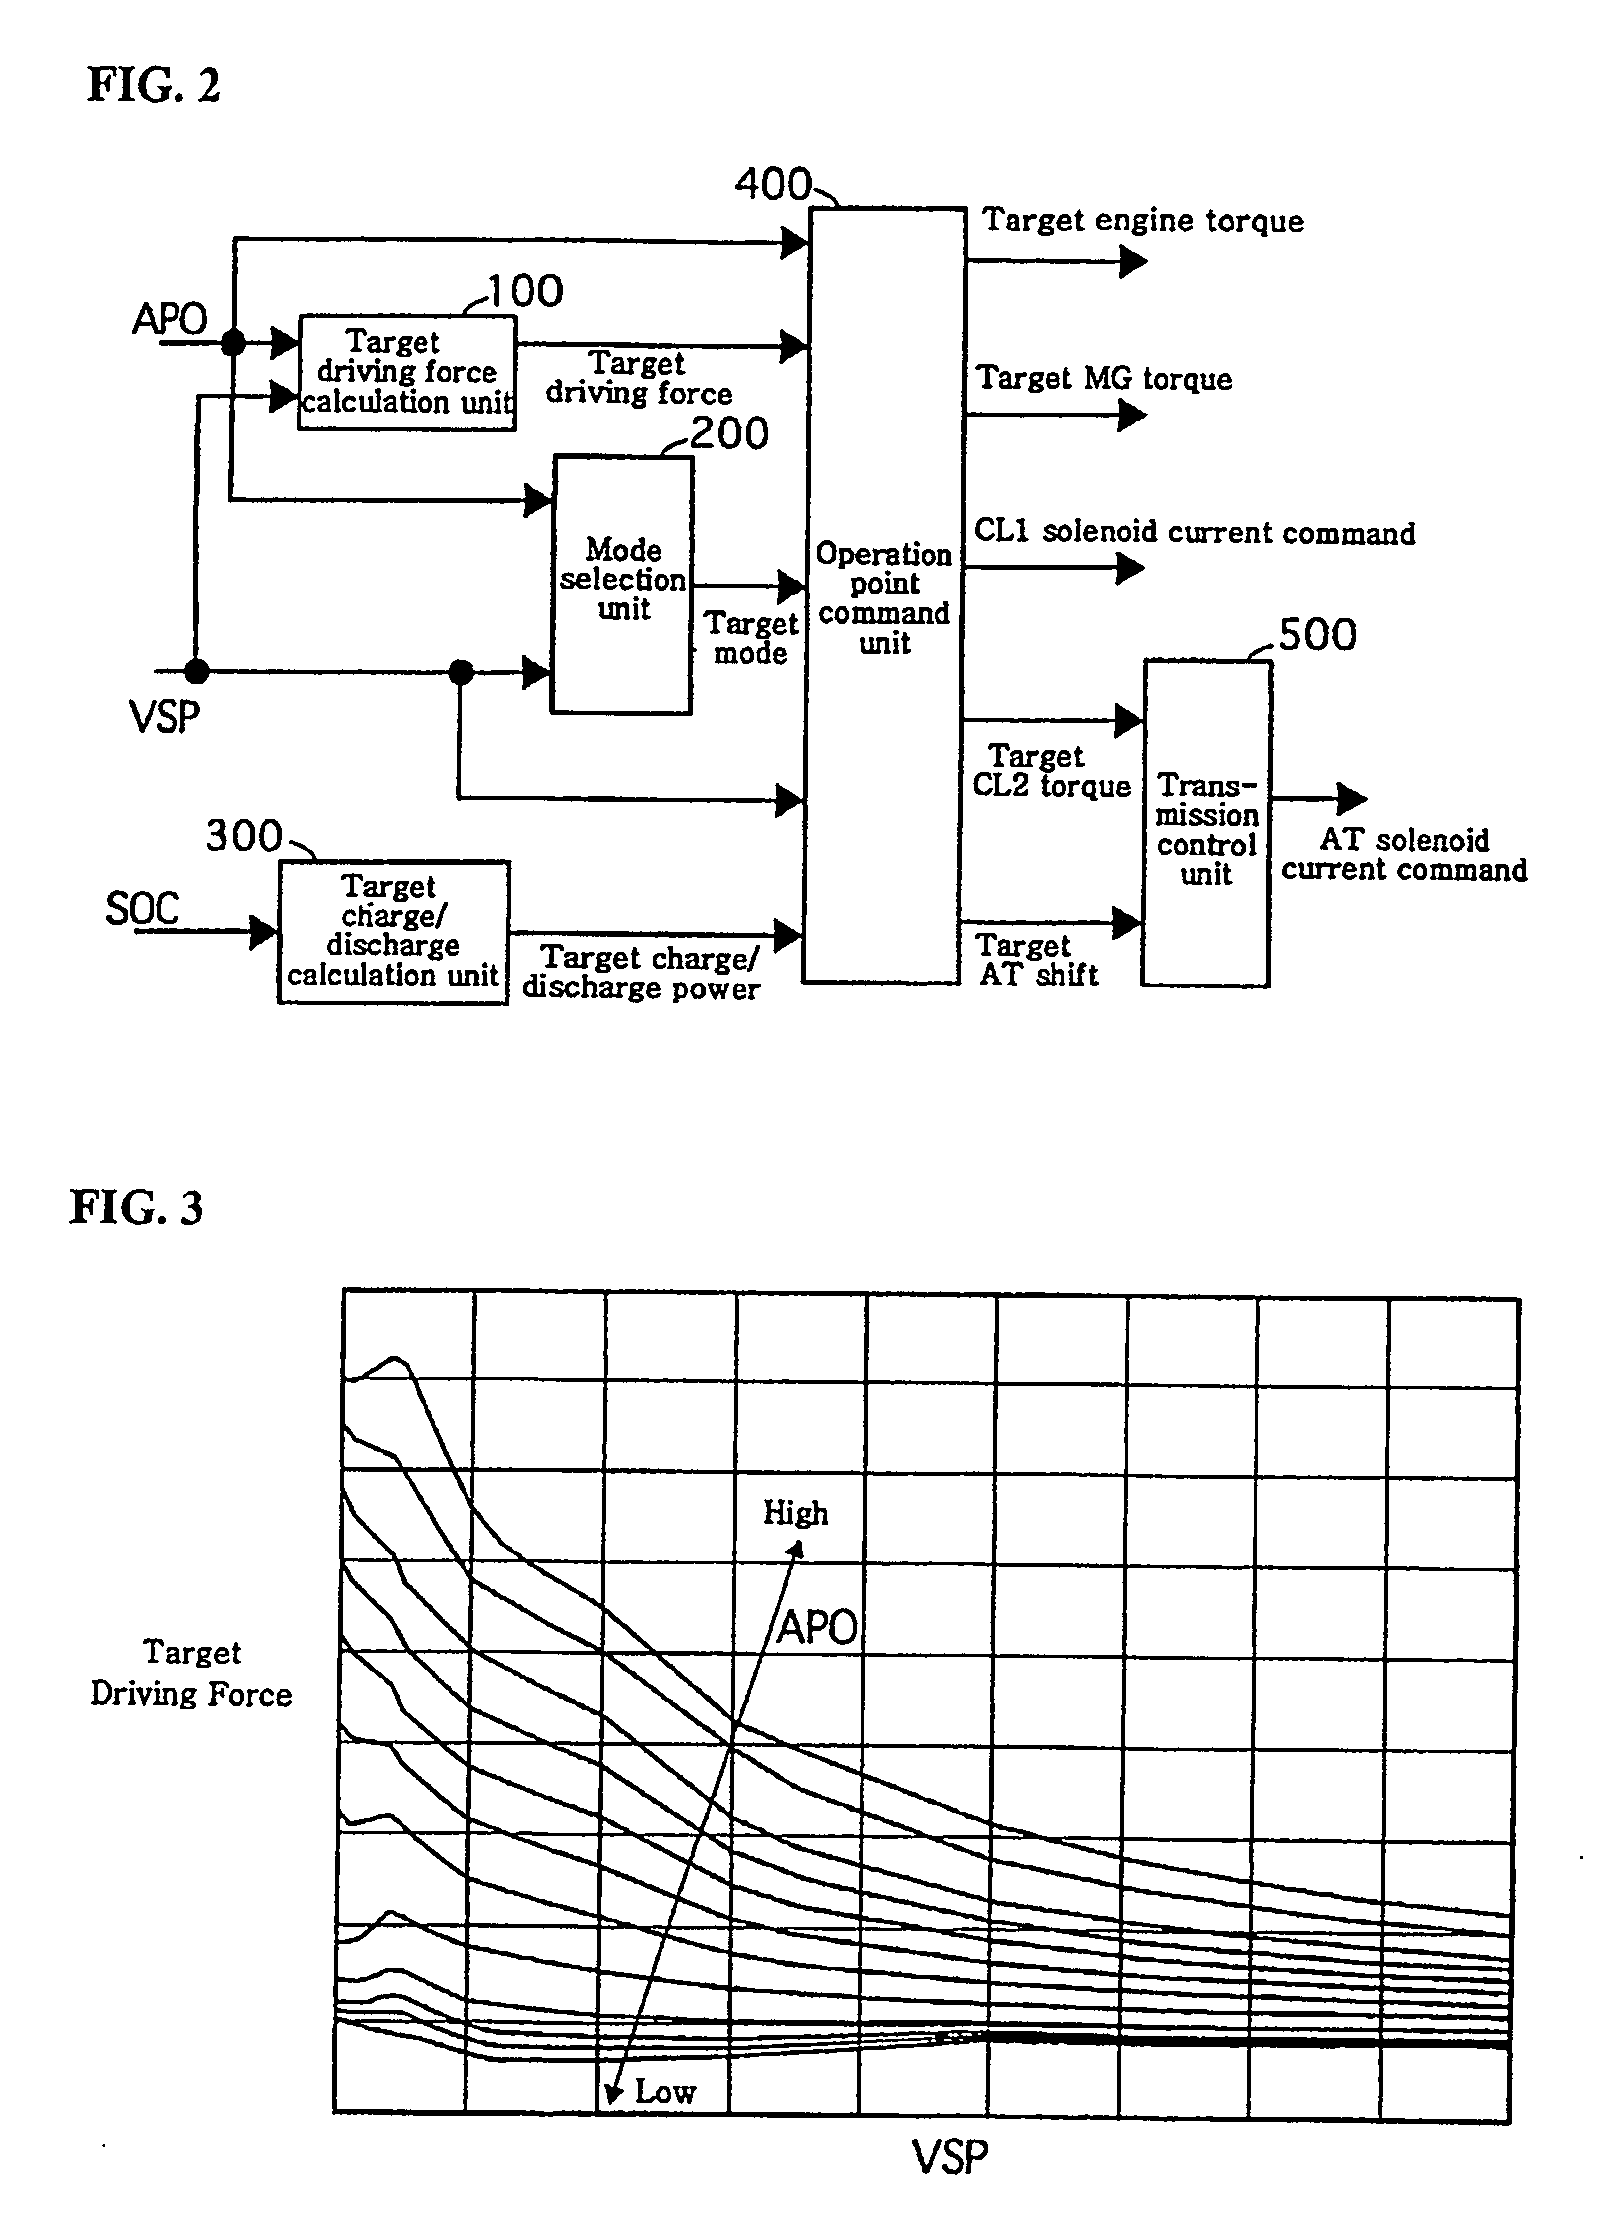 Control Unit For Controlling An Engine Stop Of A Hybrid Vehicle